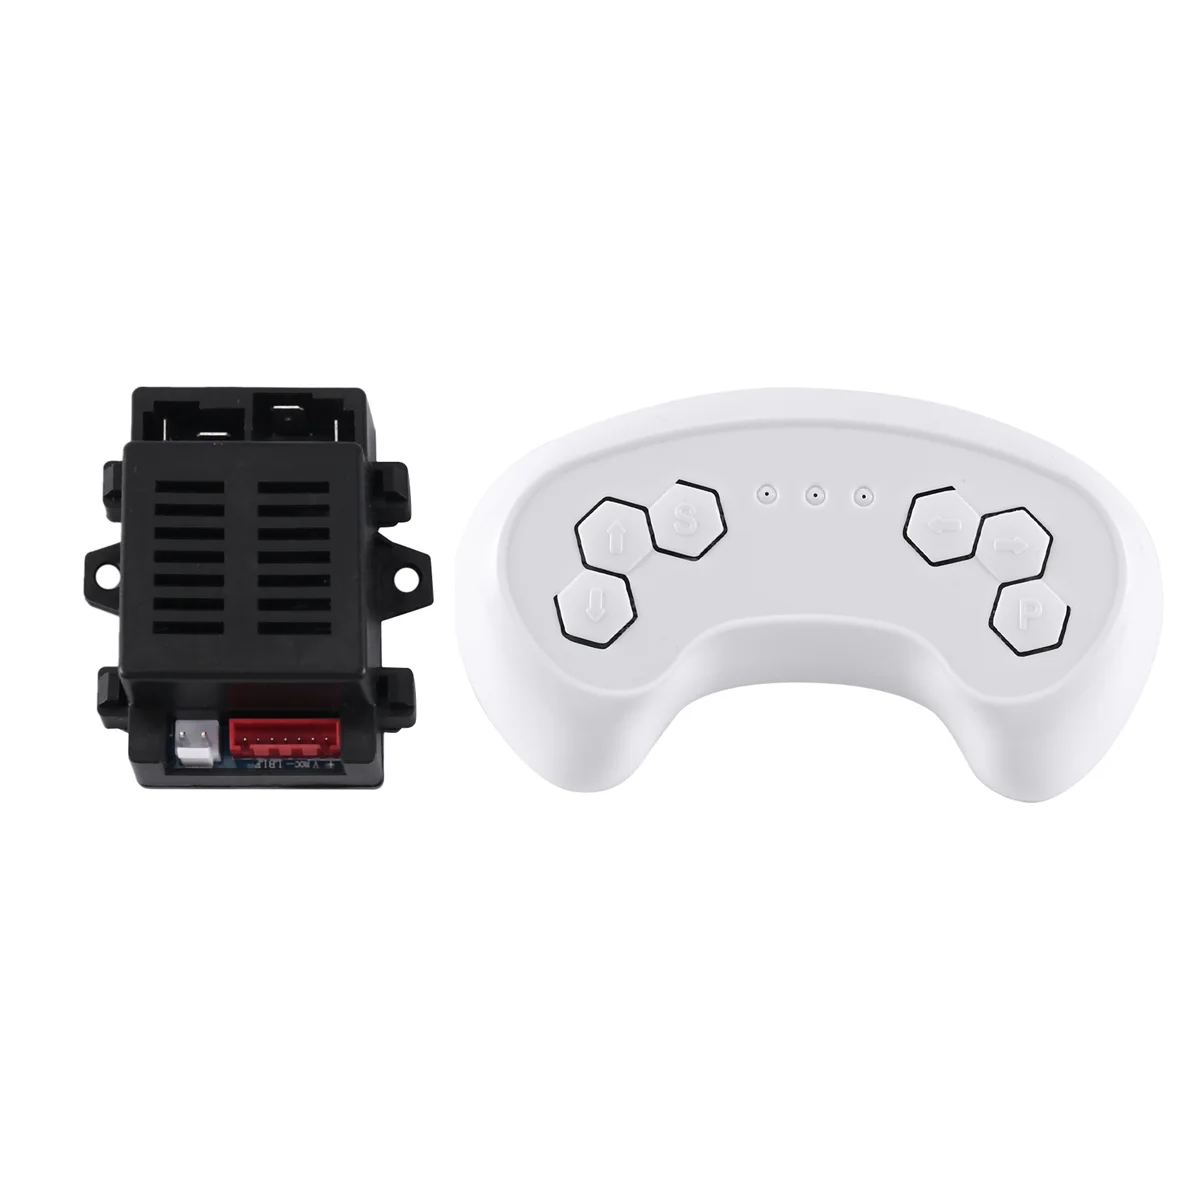 

Kids Electric Vehicle HH670Y 2.4G Remote Control and Receiver for Children Electric Vehicle Parts